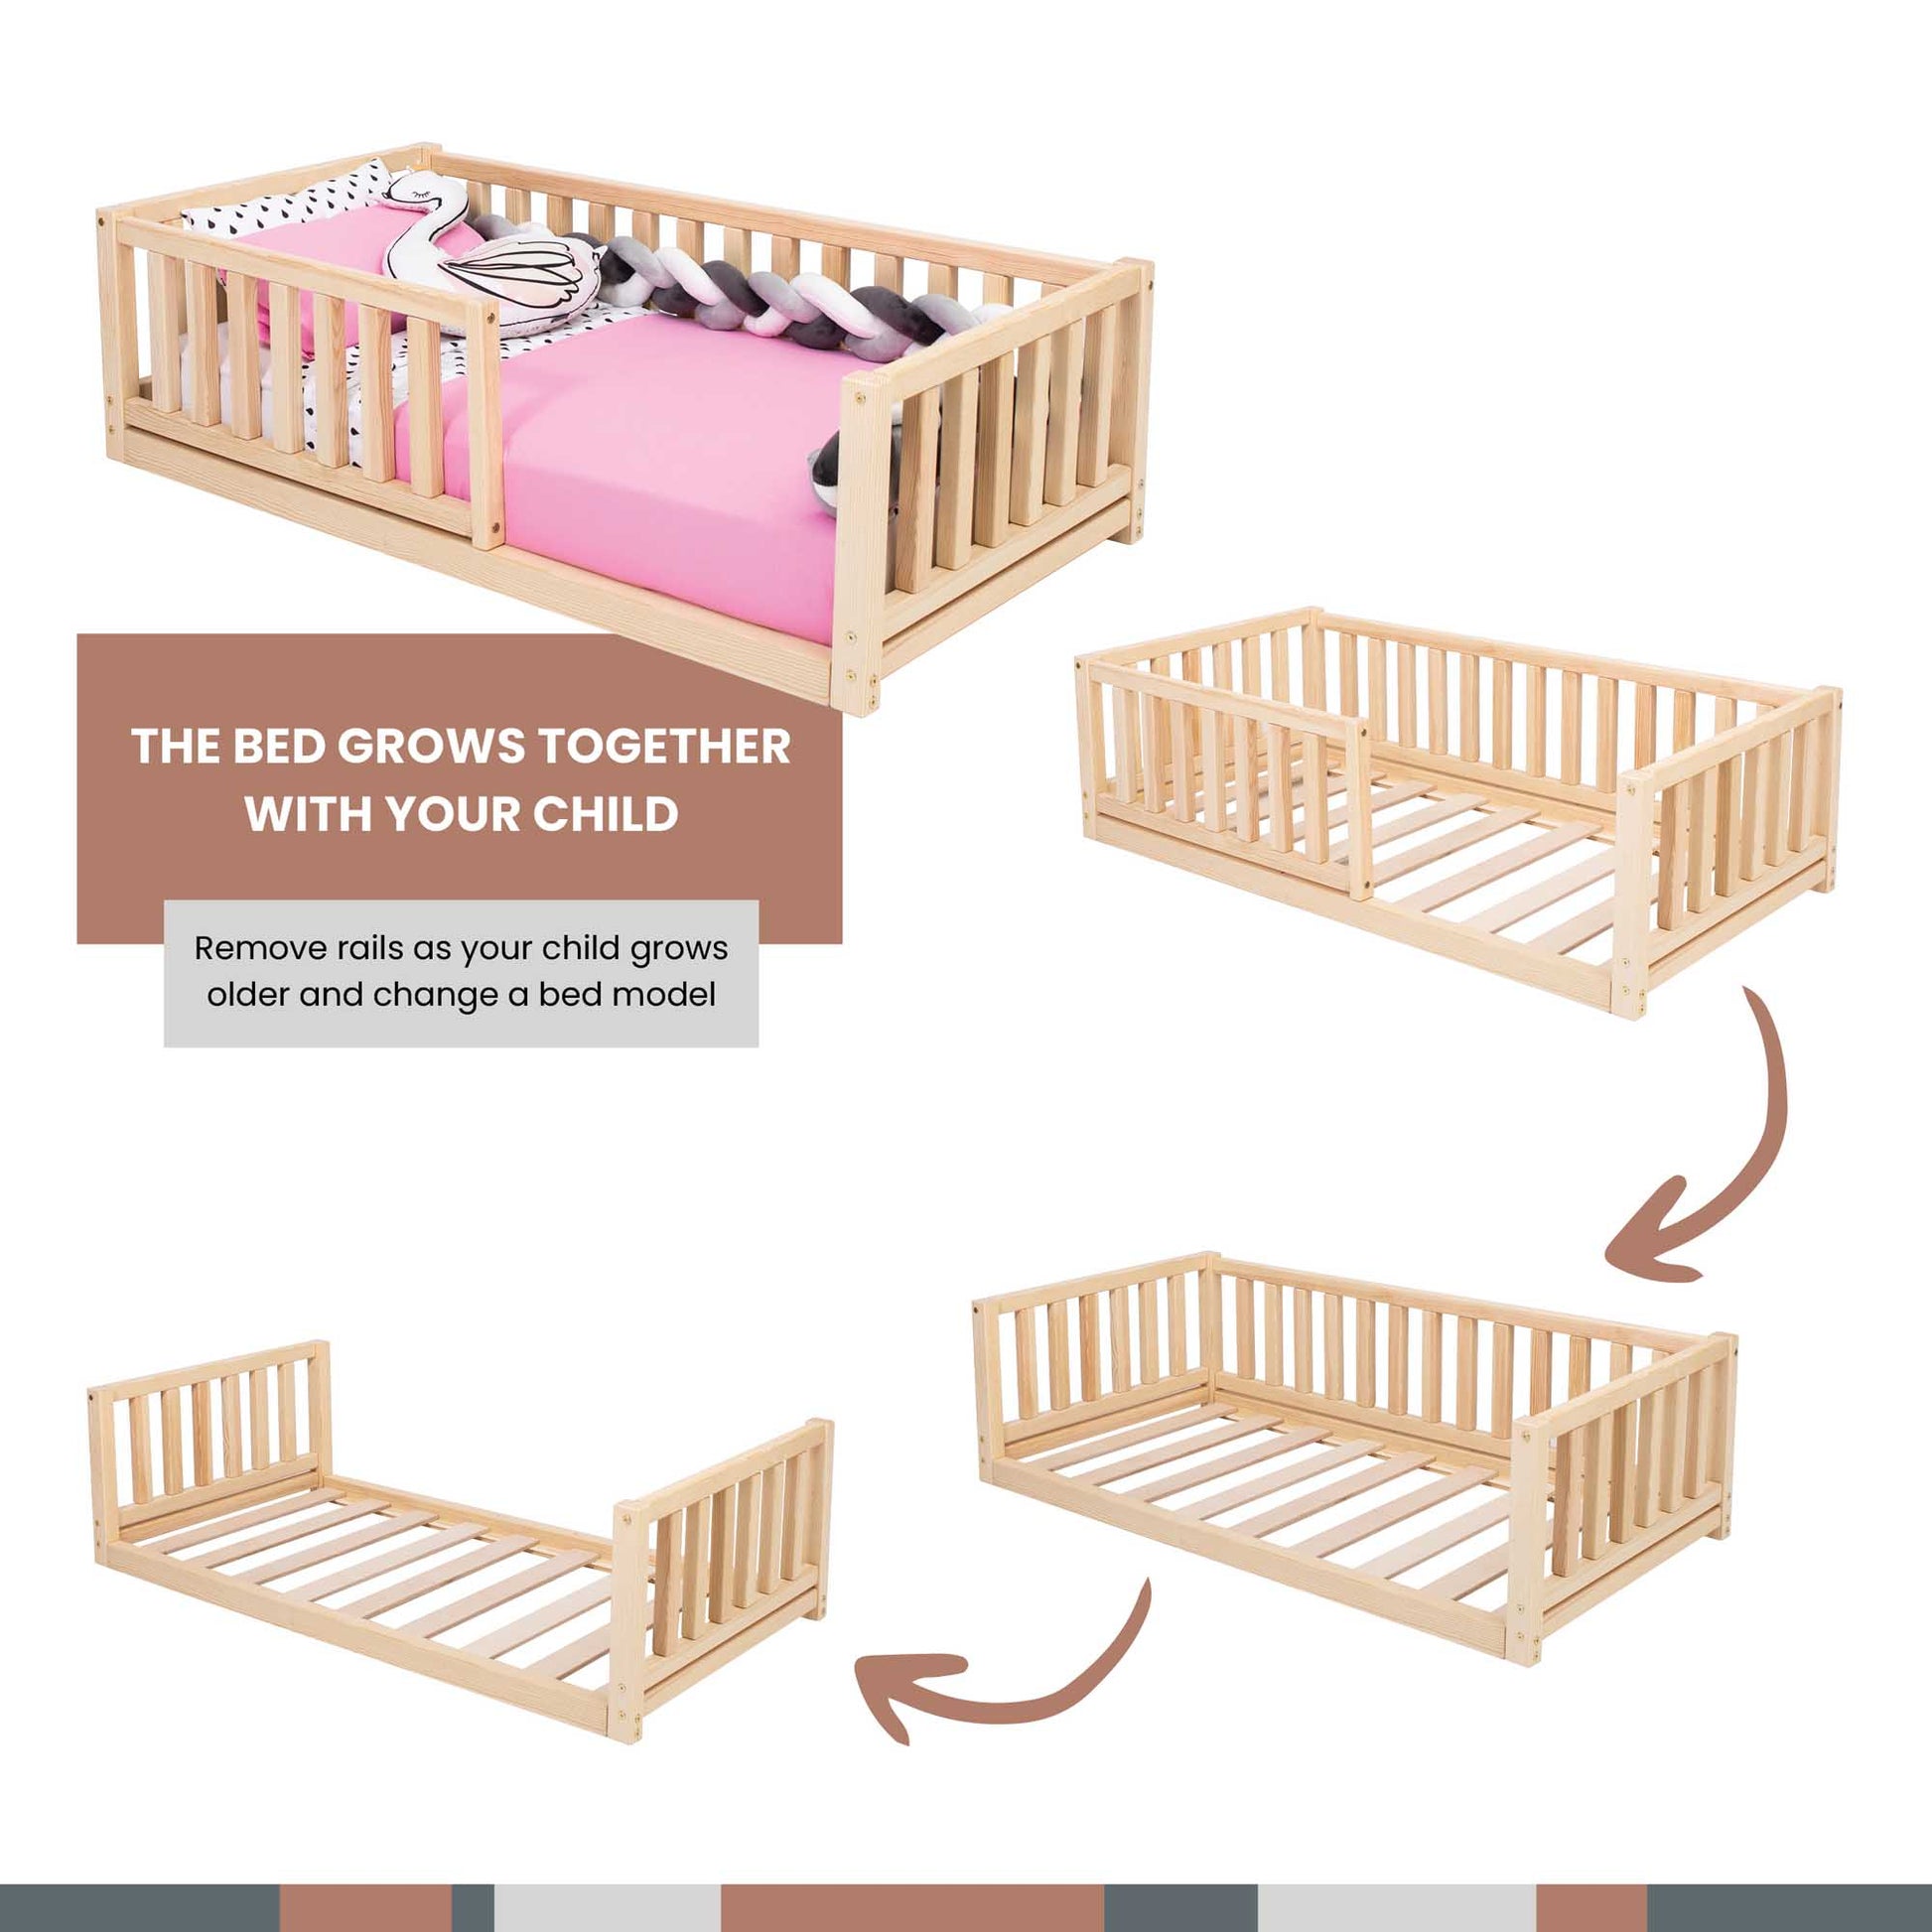 A long-lasting picture of a 2-in-1 toddler bed on legs with a vertical rail fence children's bed from Sweet Home From Wood.